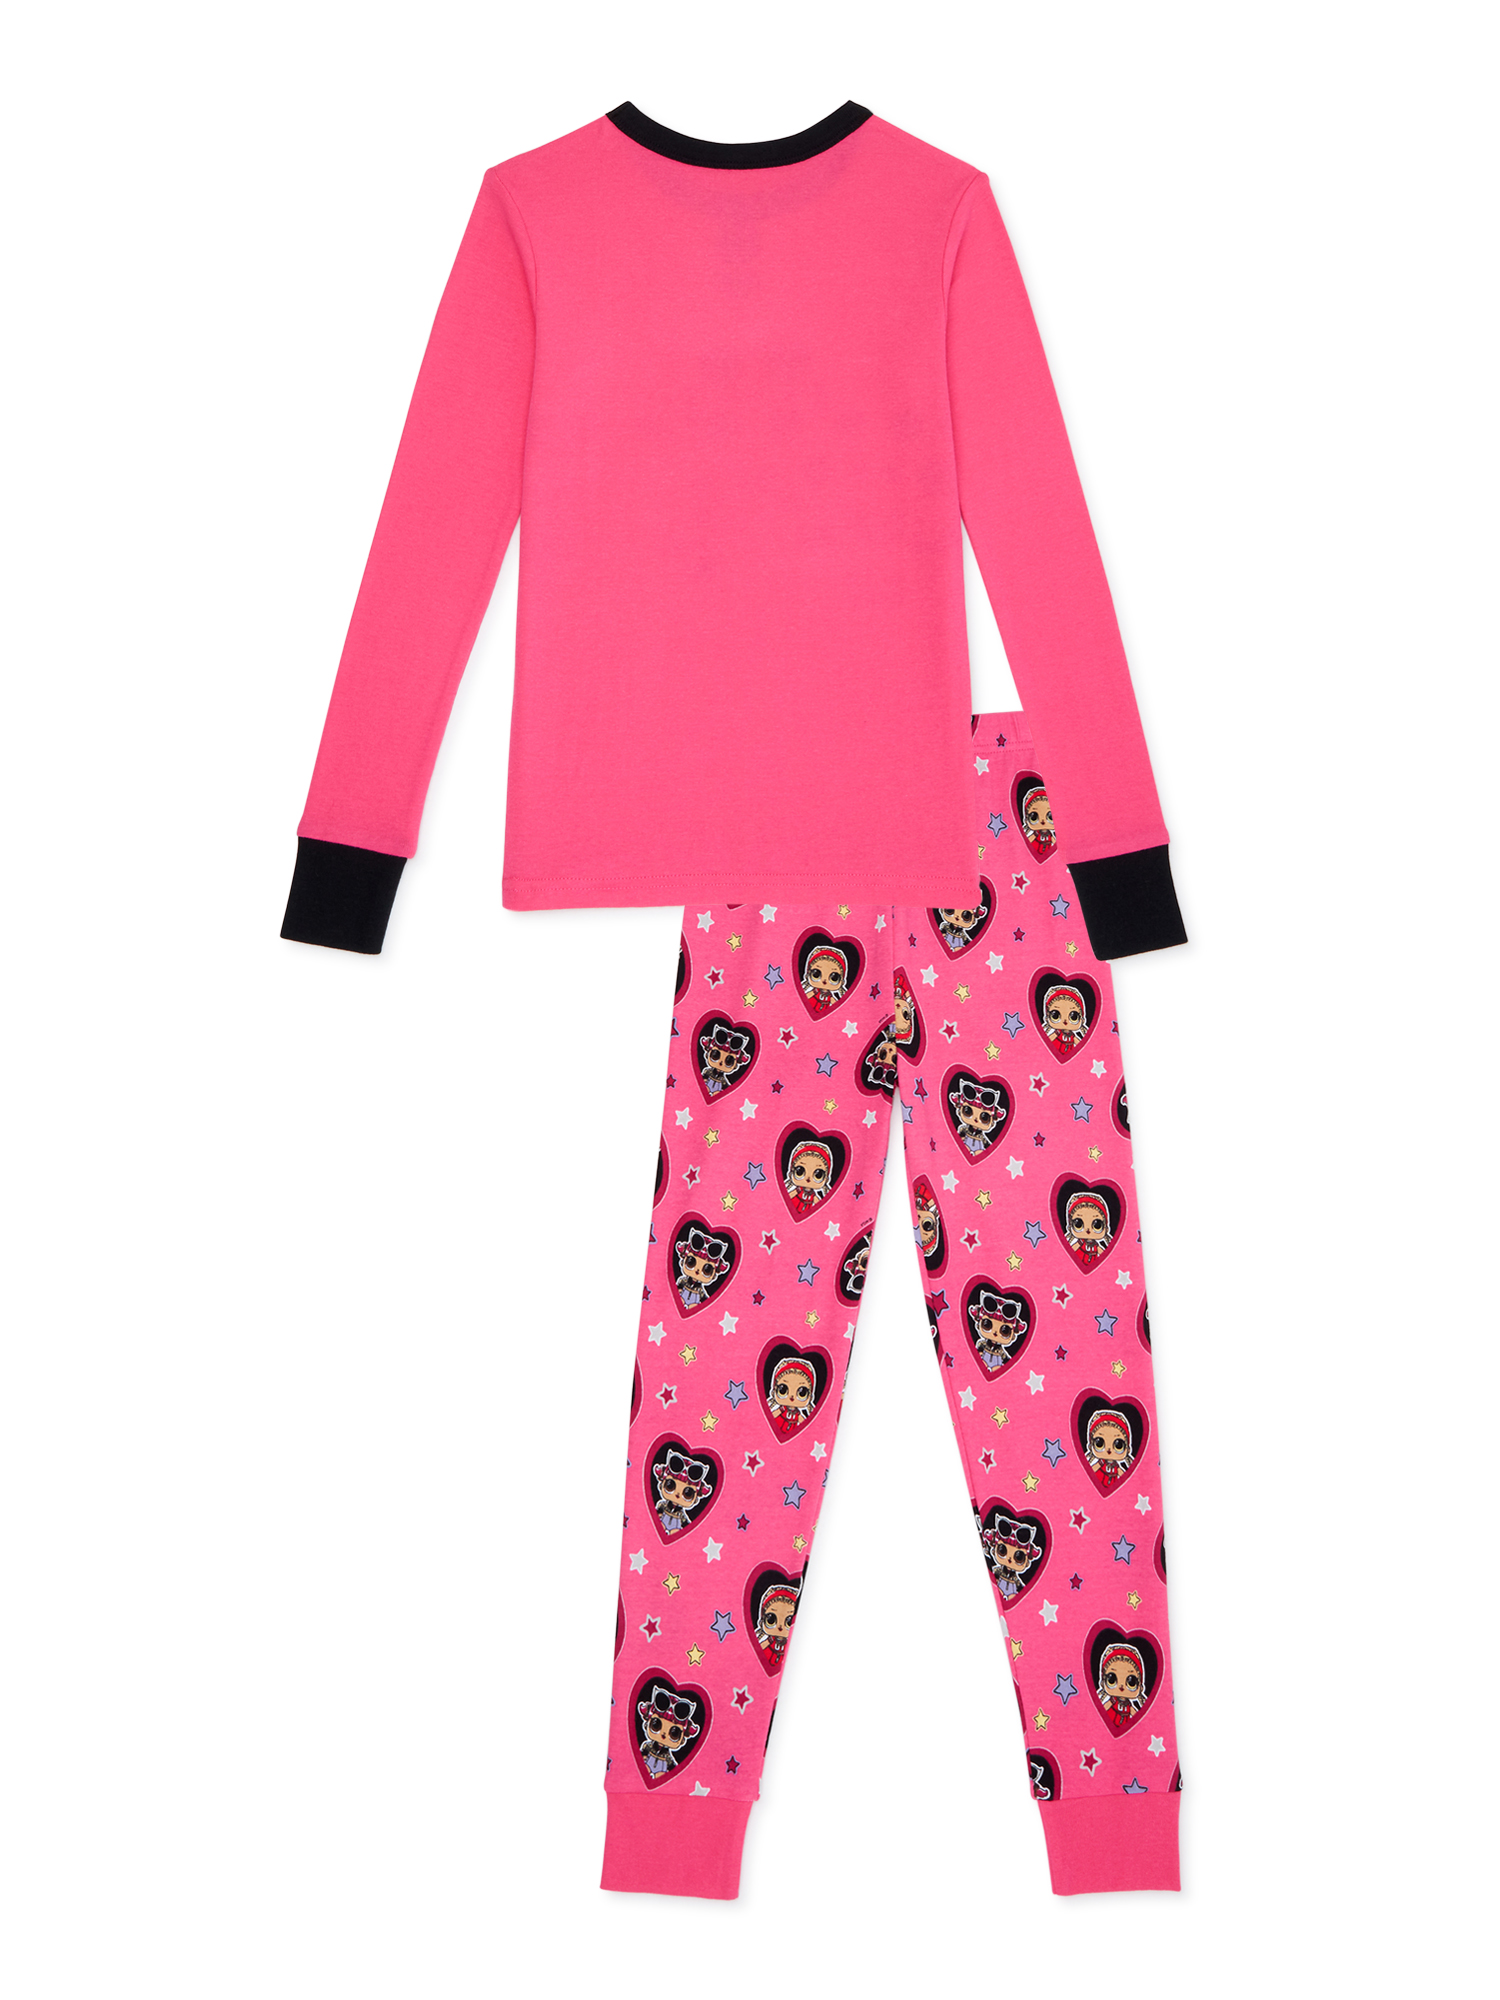 L.O.L Surprise! Girls 2-Piece Pajama Set with Slipper Sizes 4-12 - image 2 of 3